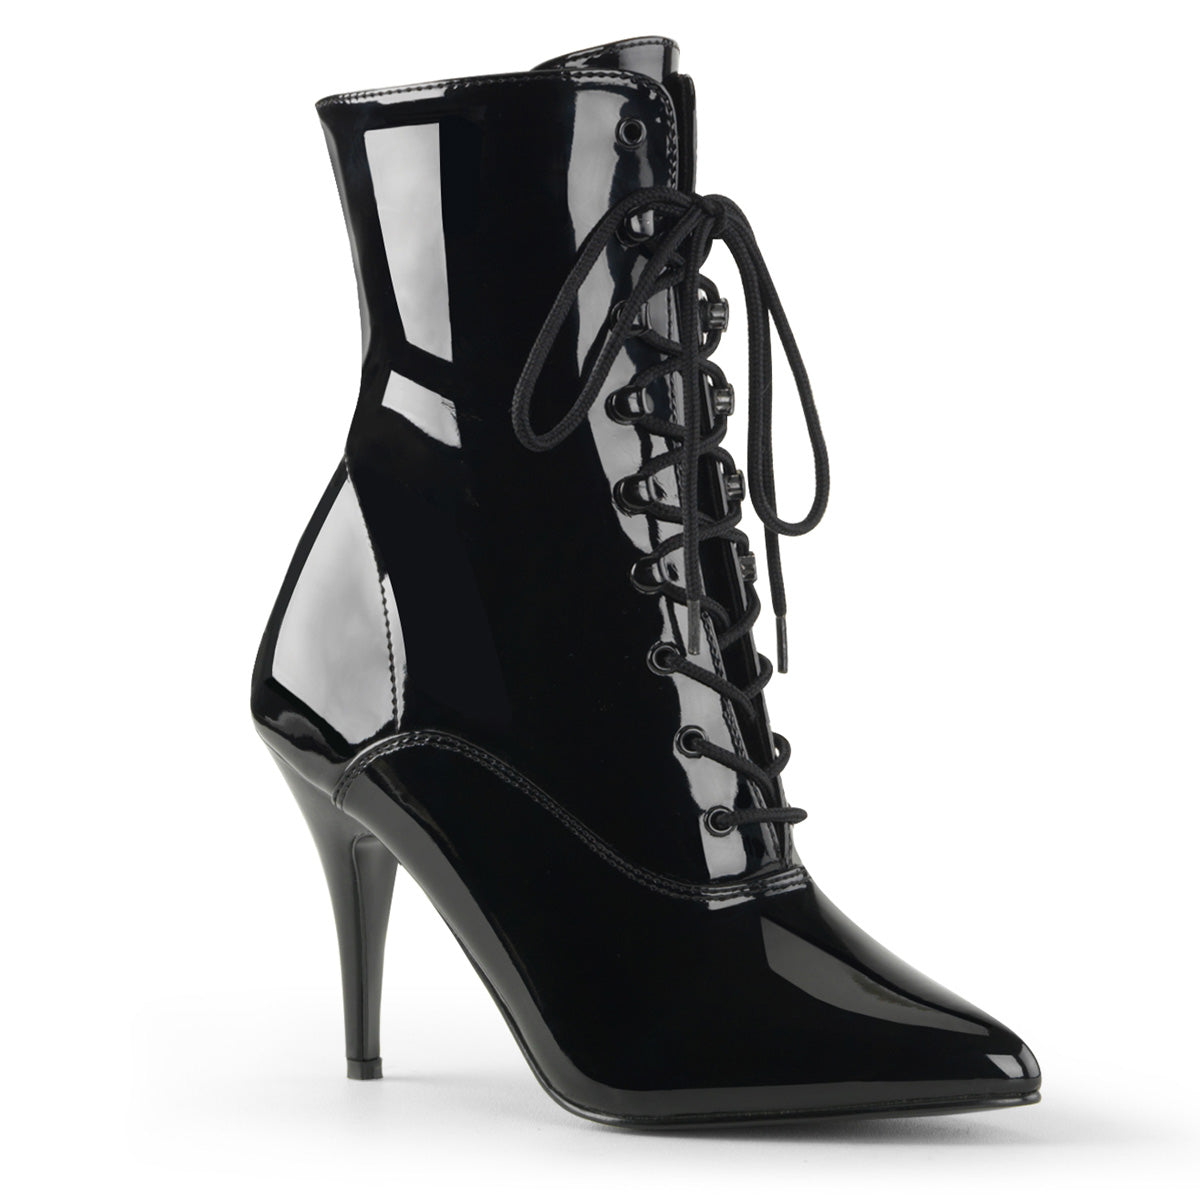 VANITY-1020 Ankle Boots 4" Heel Black Patent Fetish Ankle Boots